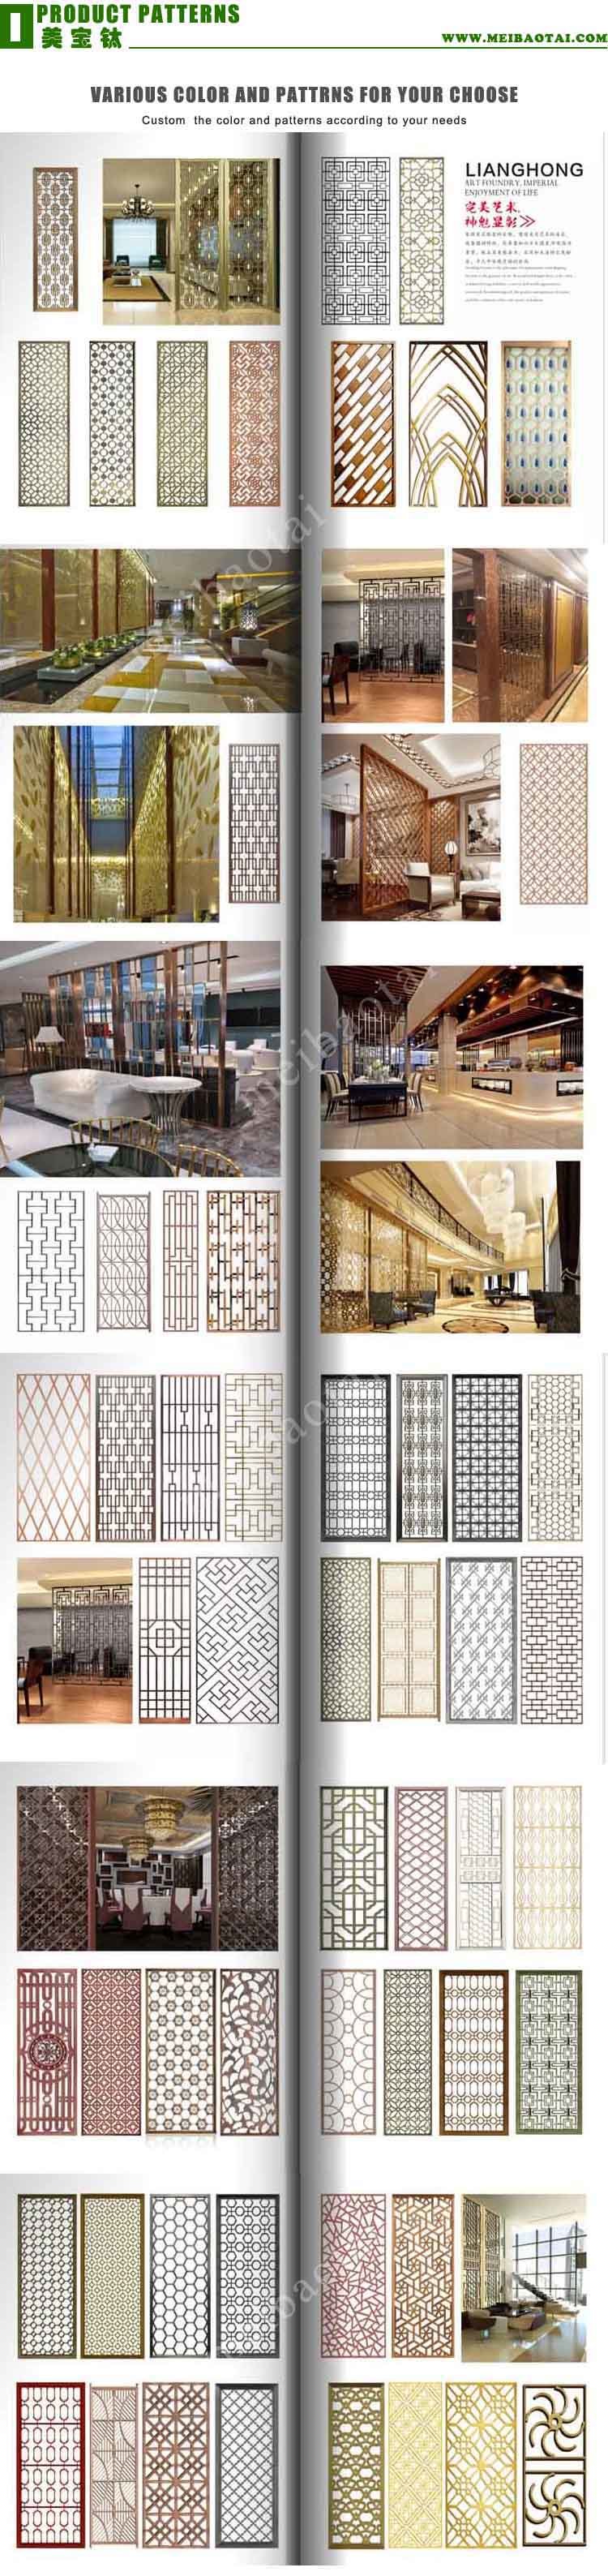 304 Stainless Steel Screen Stainless Steel Decorative Room Divider Screen